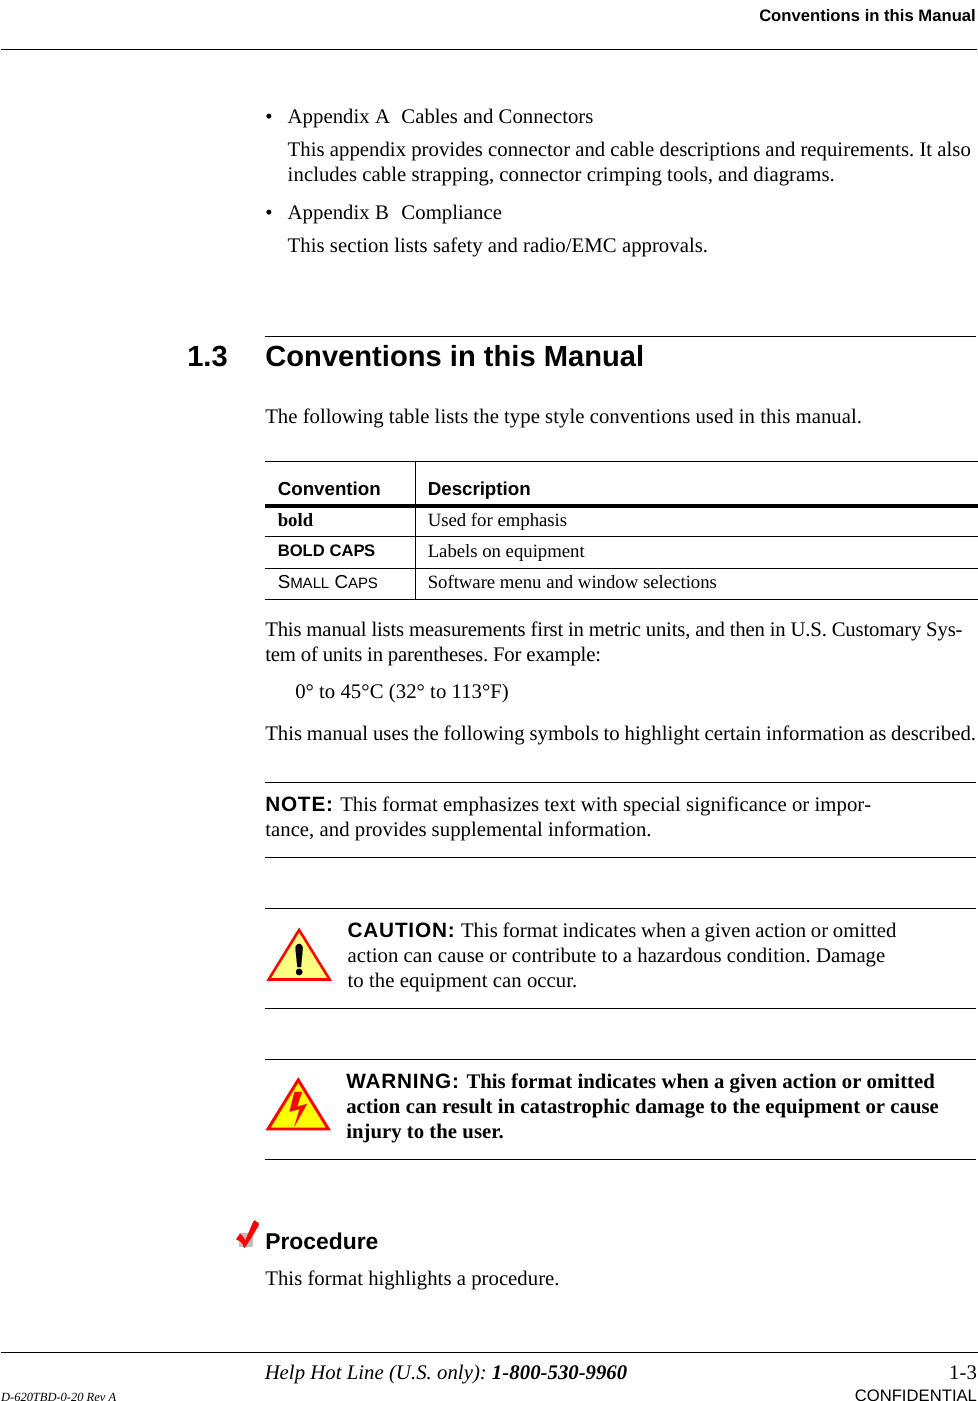 Help Hot Line (U.S. only): 1-800-530-9960 1-3D-620TBD-0-20 Rev A CONFIDENTIALConventions in this Manual• Appendix A  Cables and ConnectorsThis appendix provides connector and cable descriptions and requirements. It also includes cable strapping, connector crimping tools, and diagrams.• Appendix B  ComplianceThis section lists safety and radio/EMC approvals.1.3 Conventions in this ManualThe following table lists the type style conventions used in this manual.This manual lists measurements first in metric units, and then in U.S. Customary Sys-tem of units in parentheses. For example:0° to 45°C (32° to 113°F)This manual uses the following symbols to highlight certain information as described.NOTE: This format emphasizes text with special significance or impor-tance, and provides supplemental information.CAUTION: This format indicates when a given action or omitted action can cause or contribute to a hazardous condition. Damage to the equipment can occur.WARNING: This format indicates when a given action or omitted action can result in catastrophic damage to the equipment or cause injury to the user.ProcedureThis format highlights a procedure.Convention Descriptionbold Used for emphasisBOLD CAPS Labels on equipmentSMALL CAPS Software menu and window selections